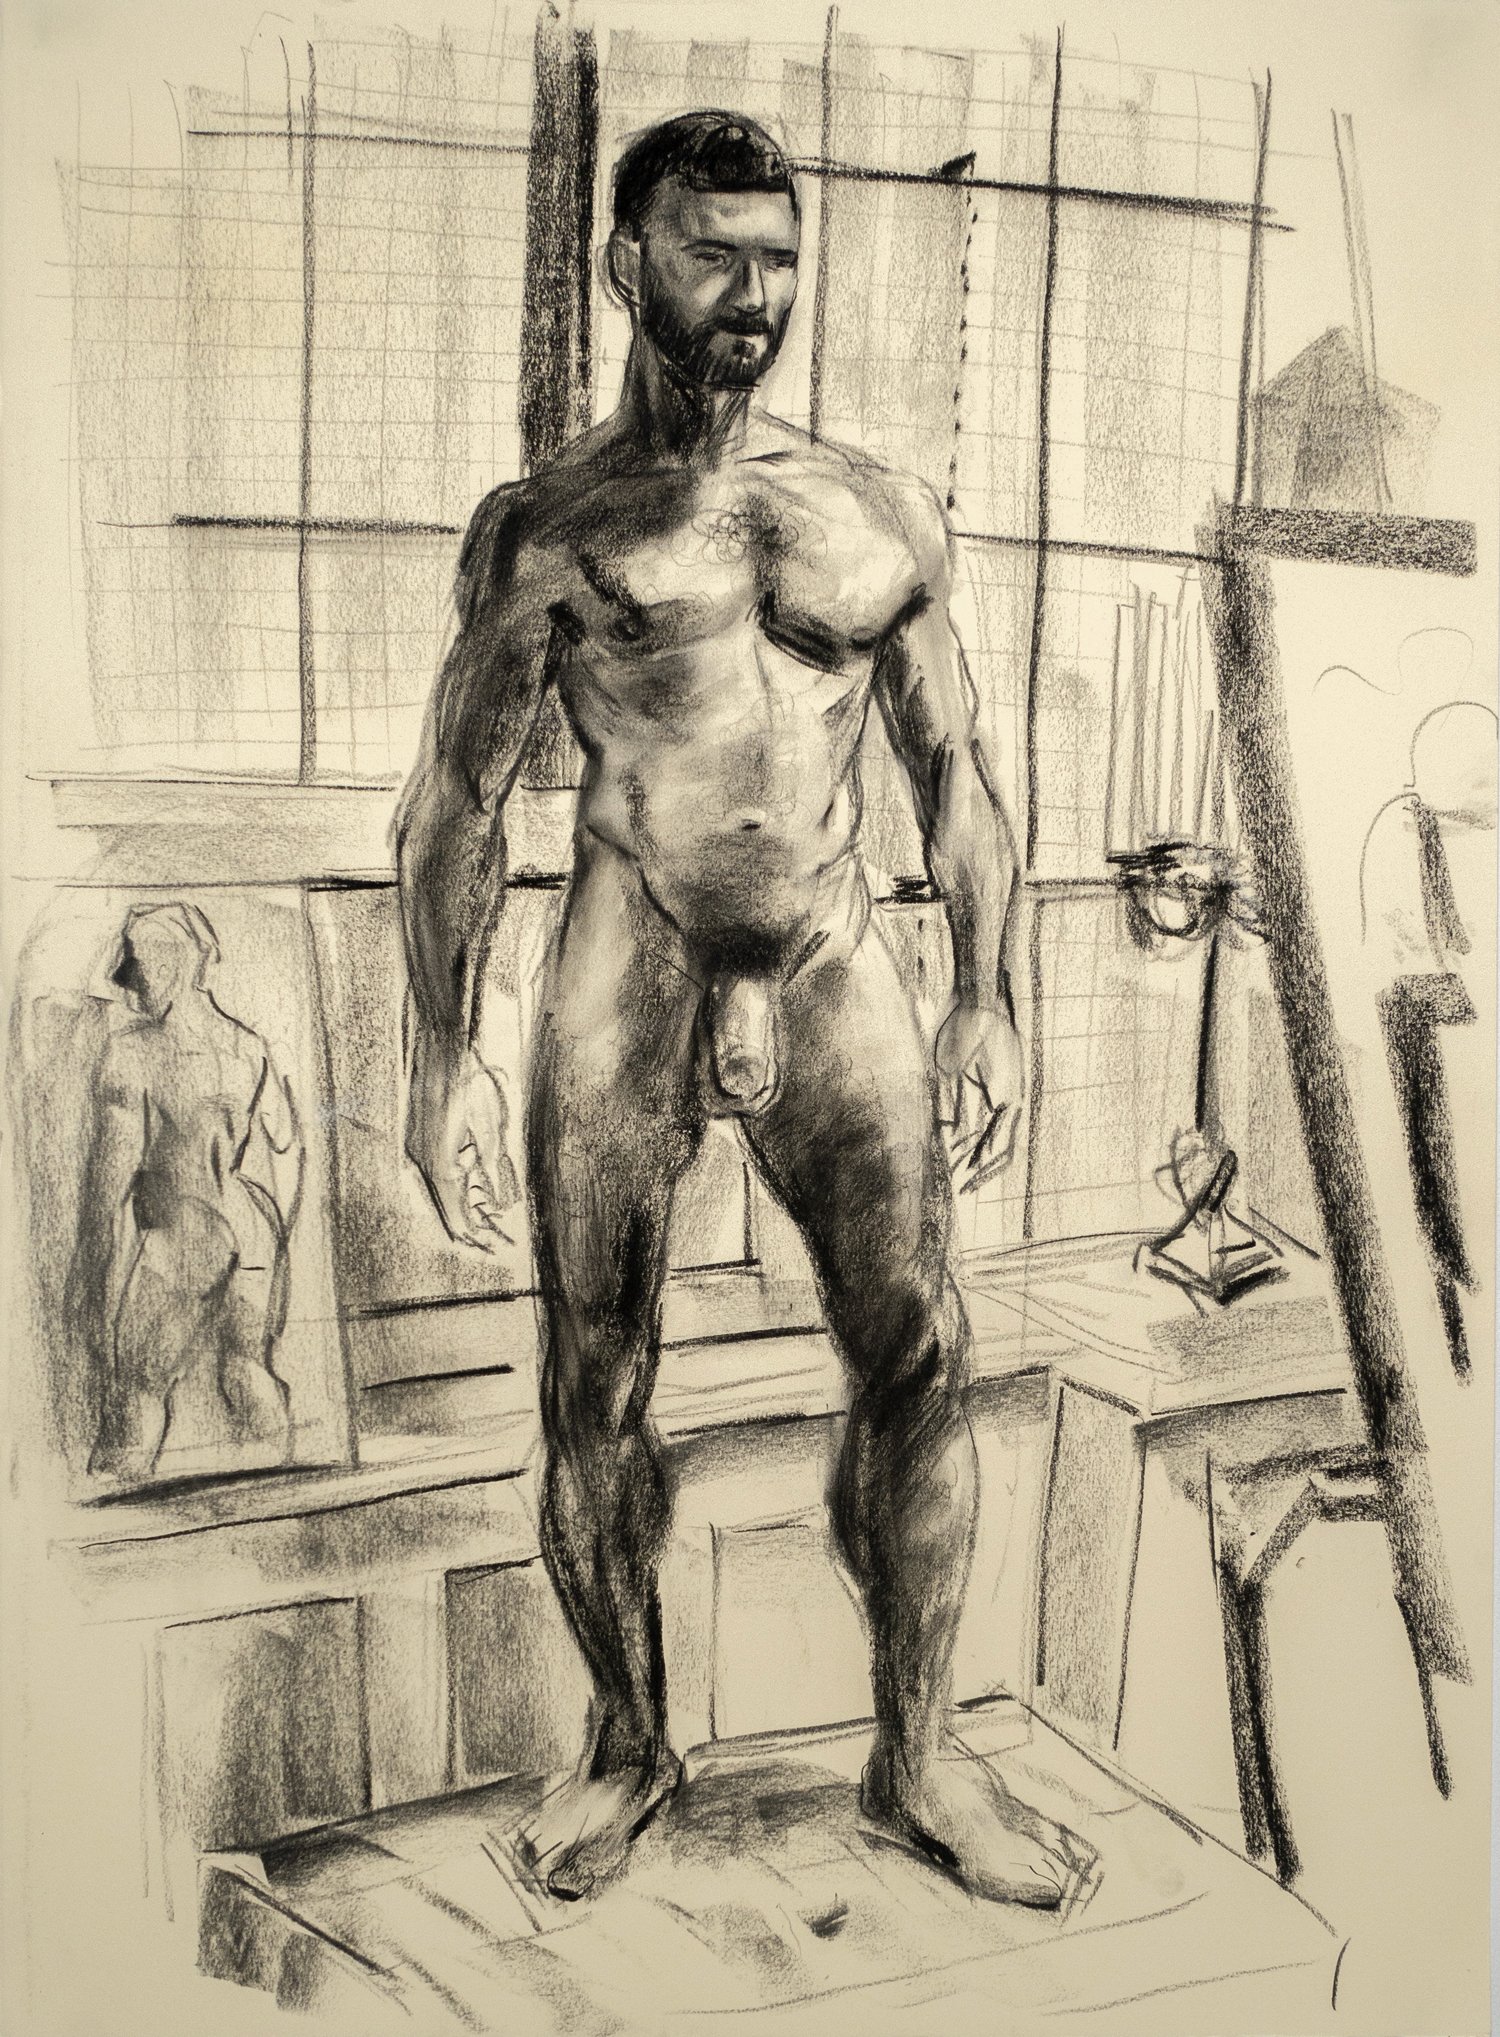   John MacConnell,  Christopher , 2021, charcoal on Rives BFK, 30”x22”   Inquire  